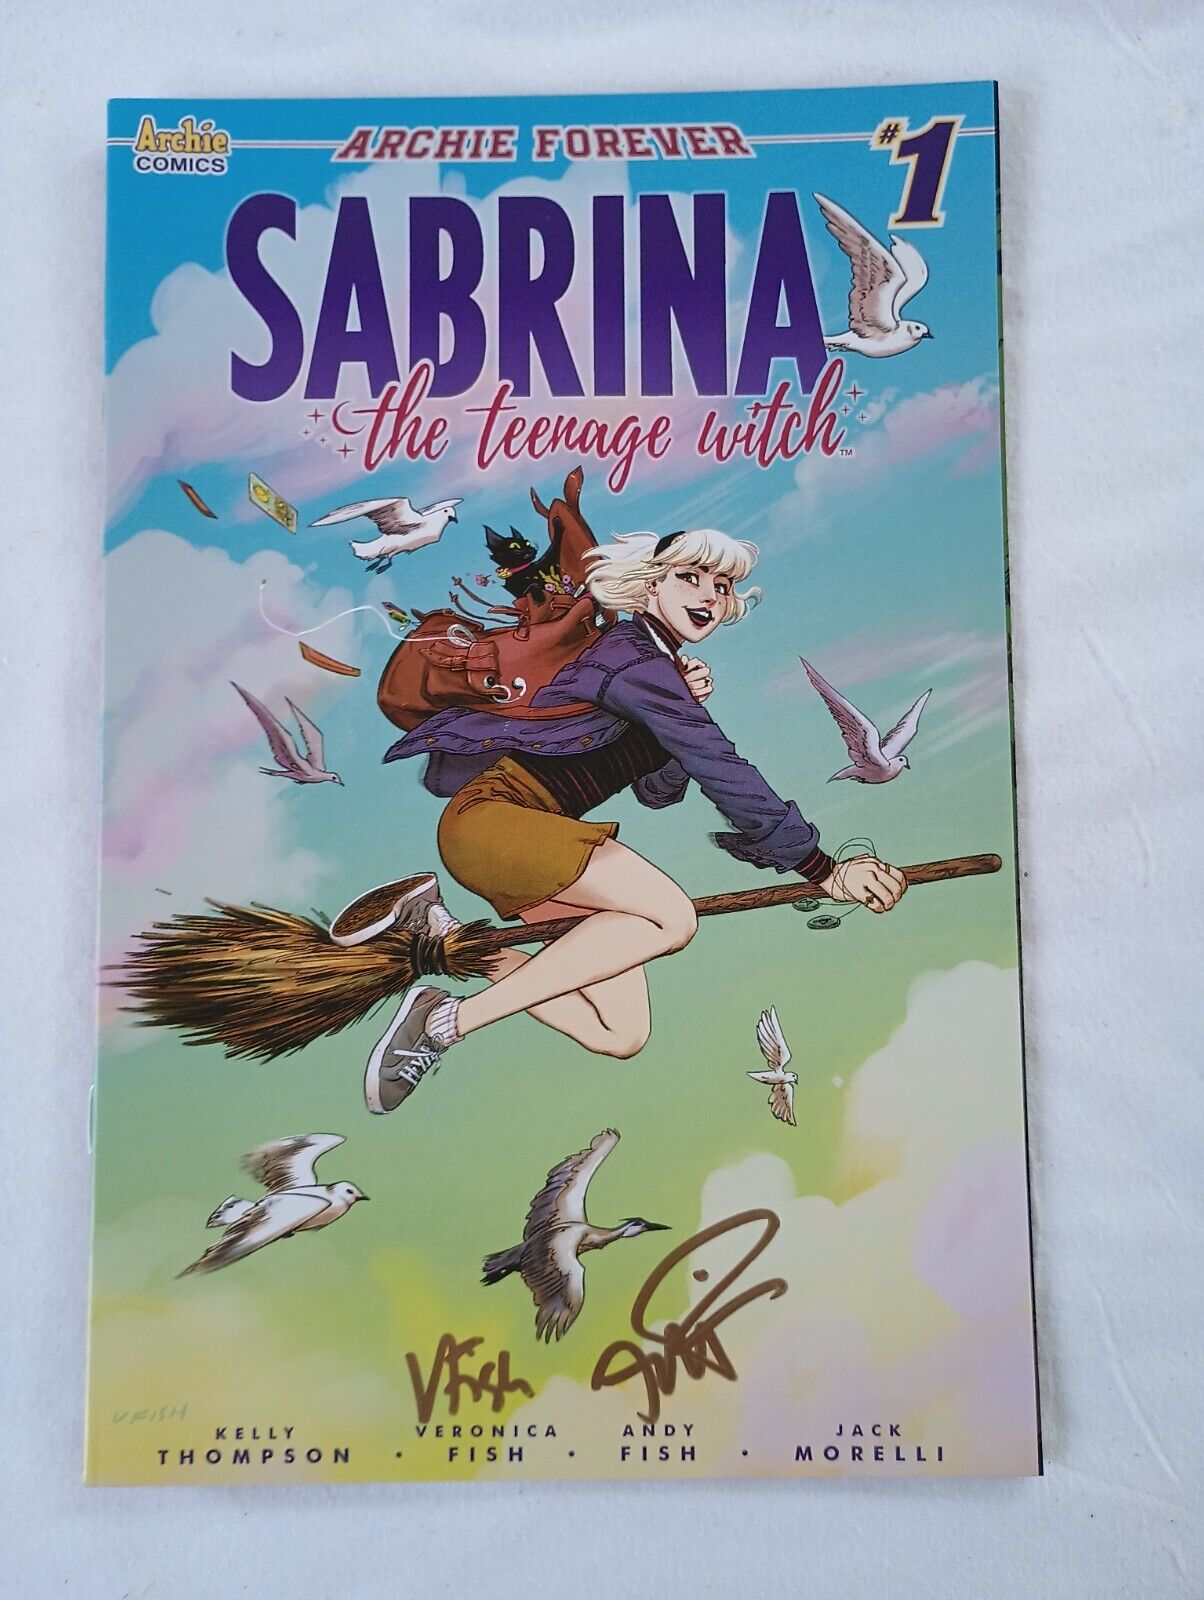 Sabrina the Teenage Witch #1 (VFNM) Archie 2019 signed Veronica & Andy Fish